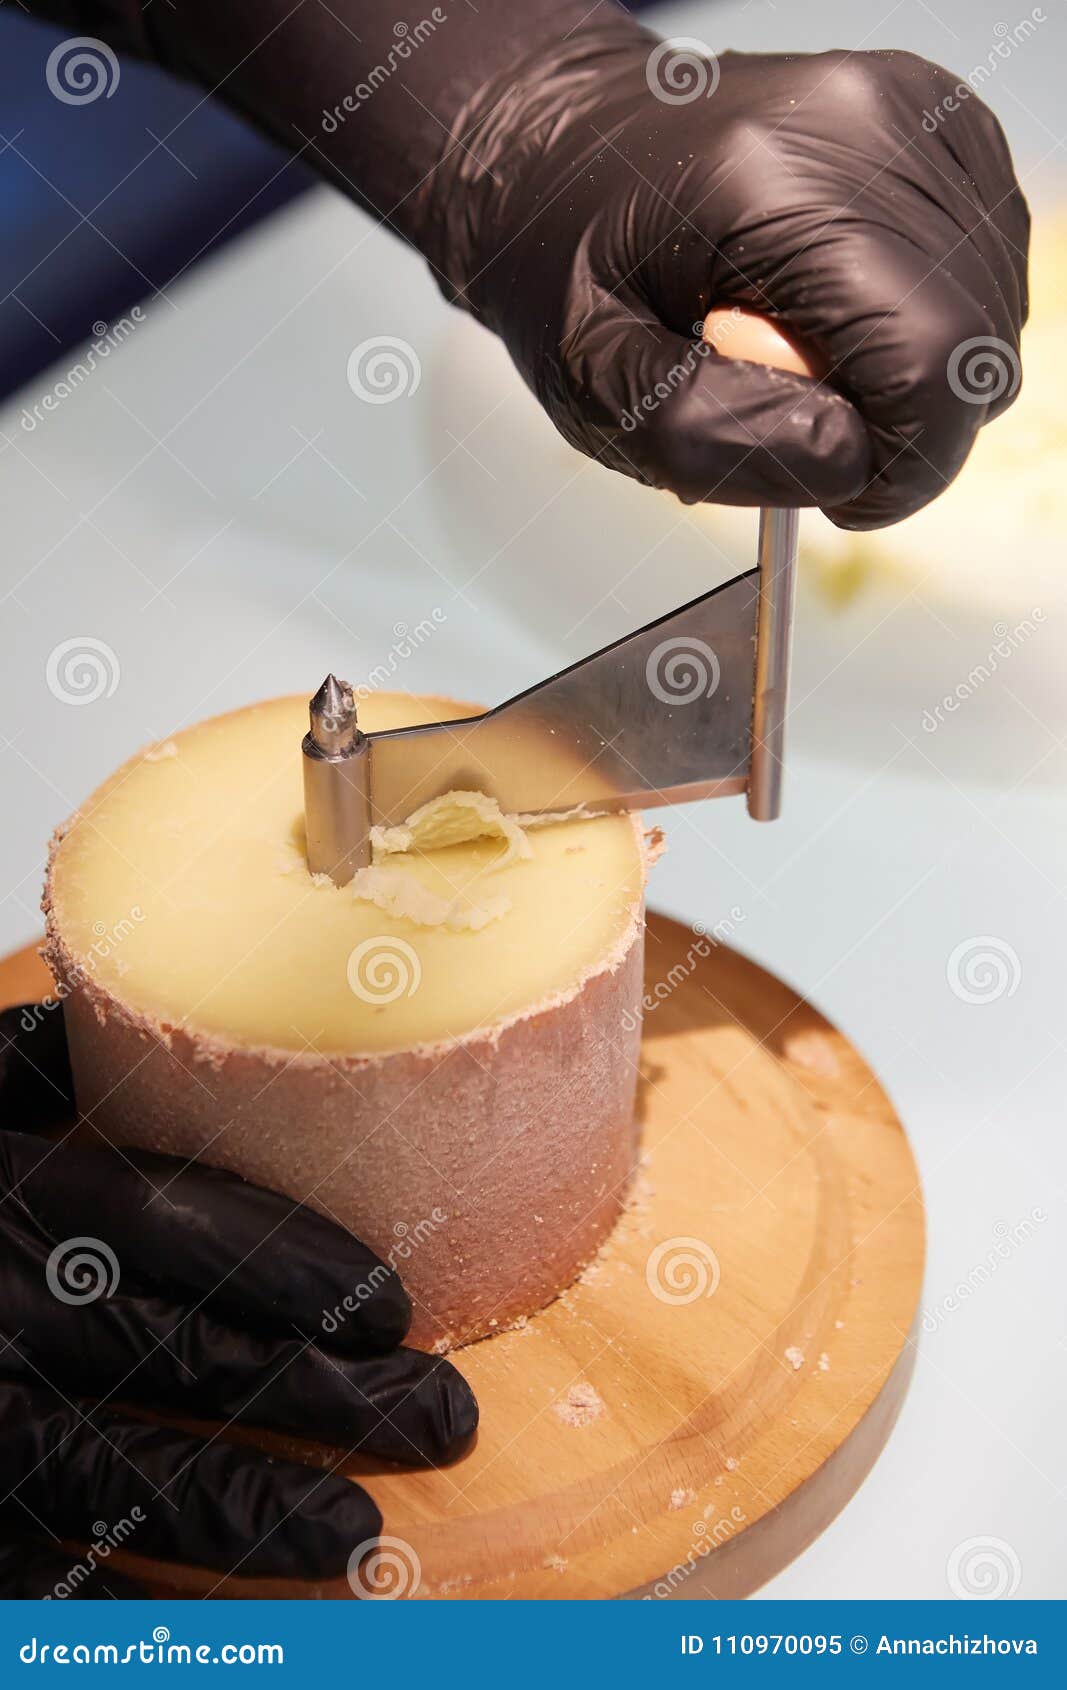 https://thumbs.dreamstime.com/z/special-cheese-knives-girolle-scraper-making-cheese-shaving-girolle-closeup-special-cheese-knives-girolle-scraper-110970095.jpg